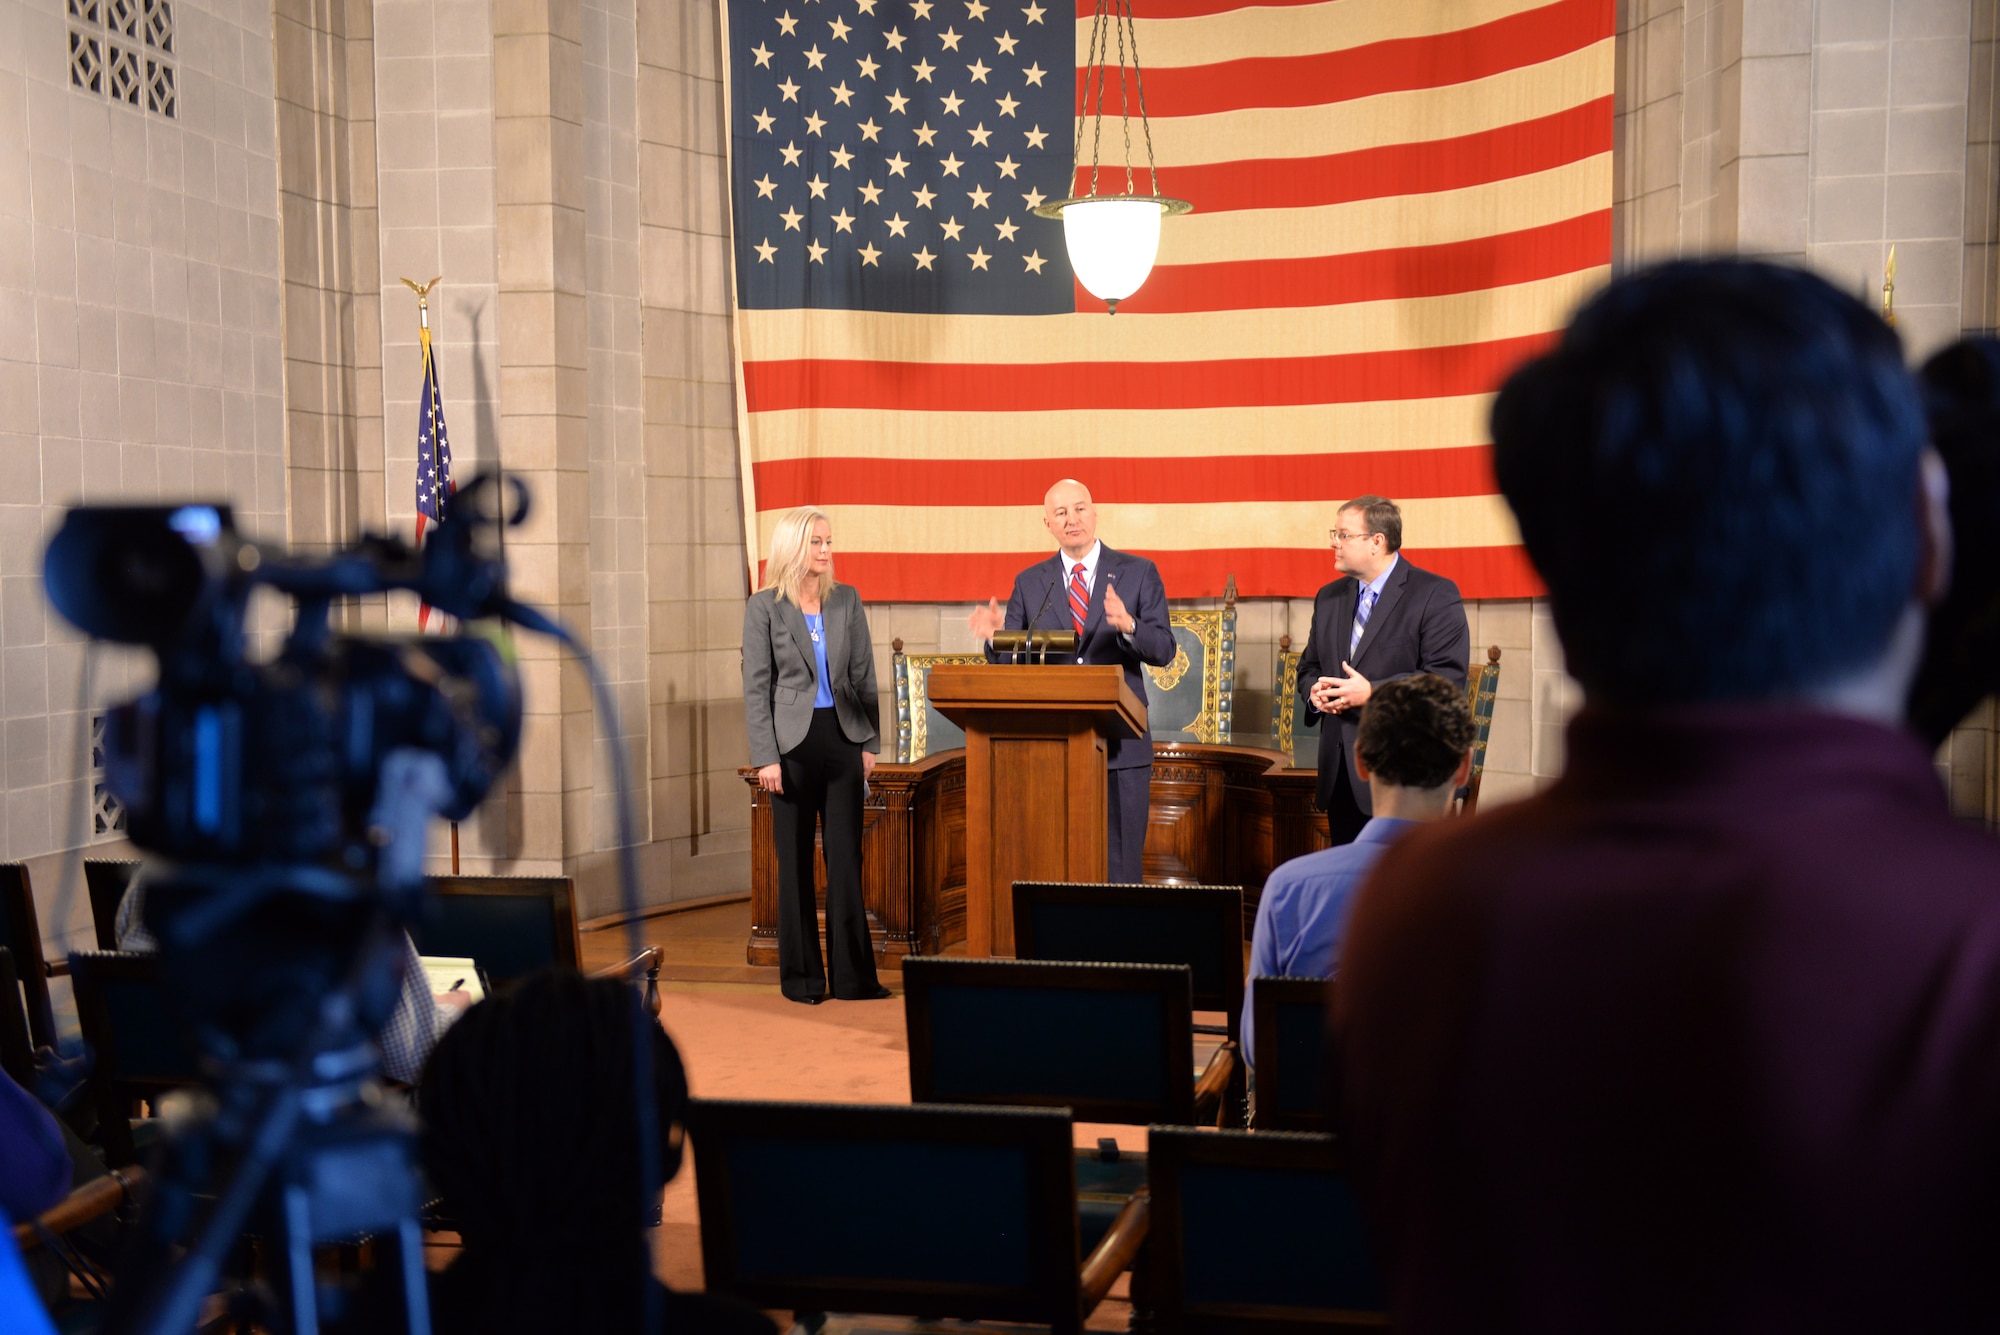 Nebraska Gov. Pete Ricketts addresses the media, March 19, 2018, at the Nebraska State Capitol in Lincoln, Nebraska after signing a change to Rule 21, which regulates state teaching licenses,which will make it easier for military spouses to teach immediately if they have recently arrived from out of state.